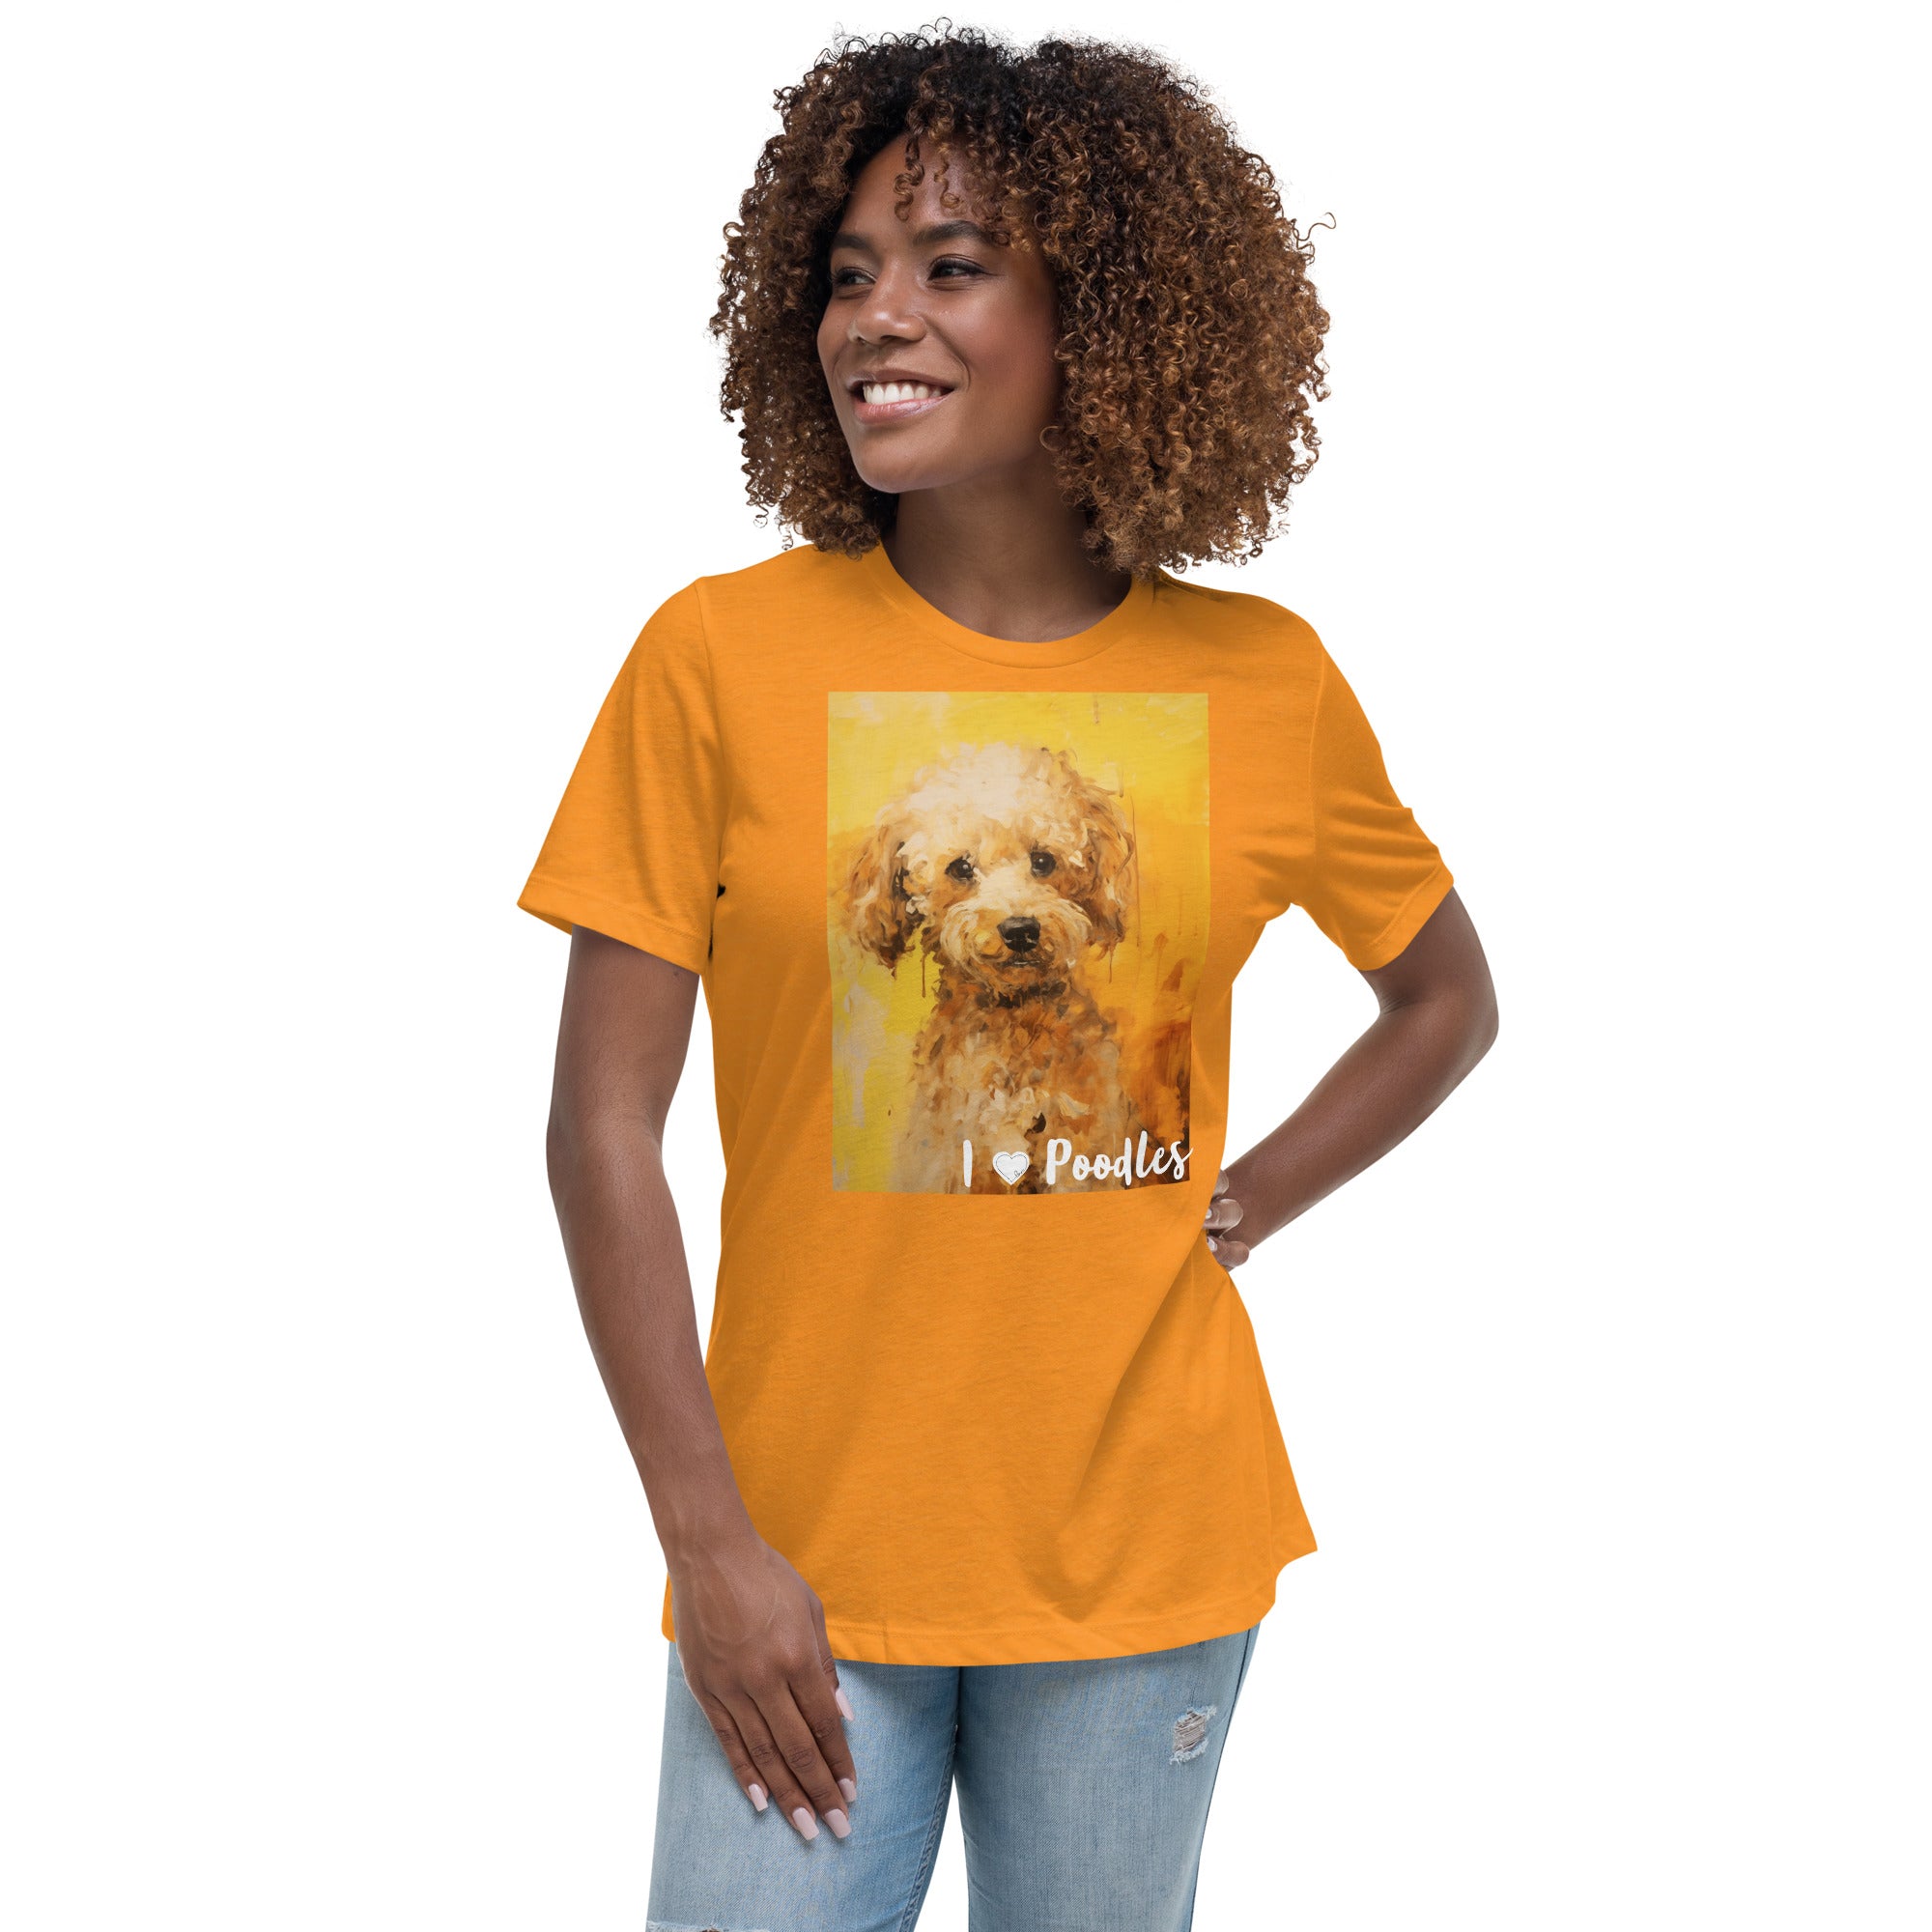 Women's Relaxed T-Shirt - I ❤ Dogs - Poodle